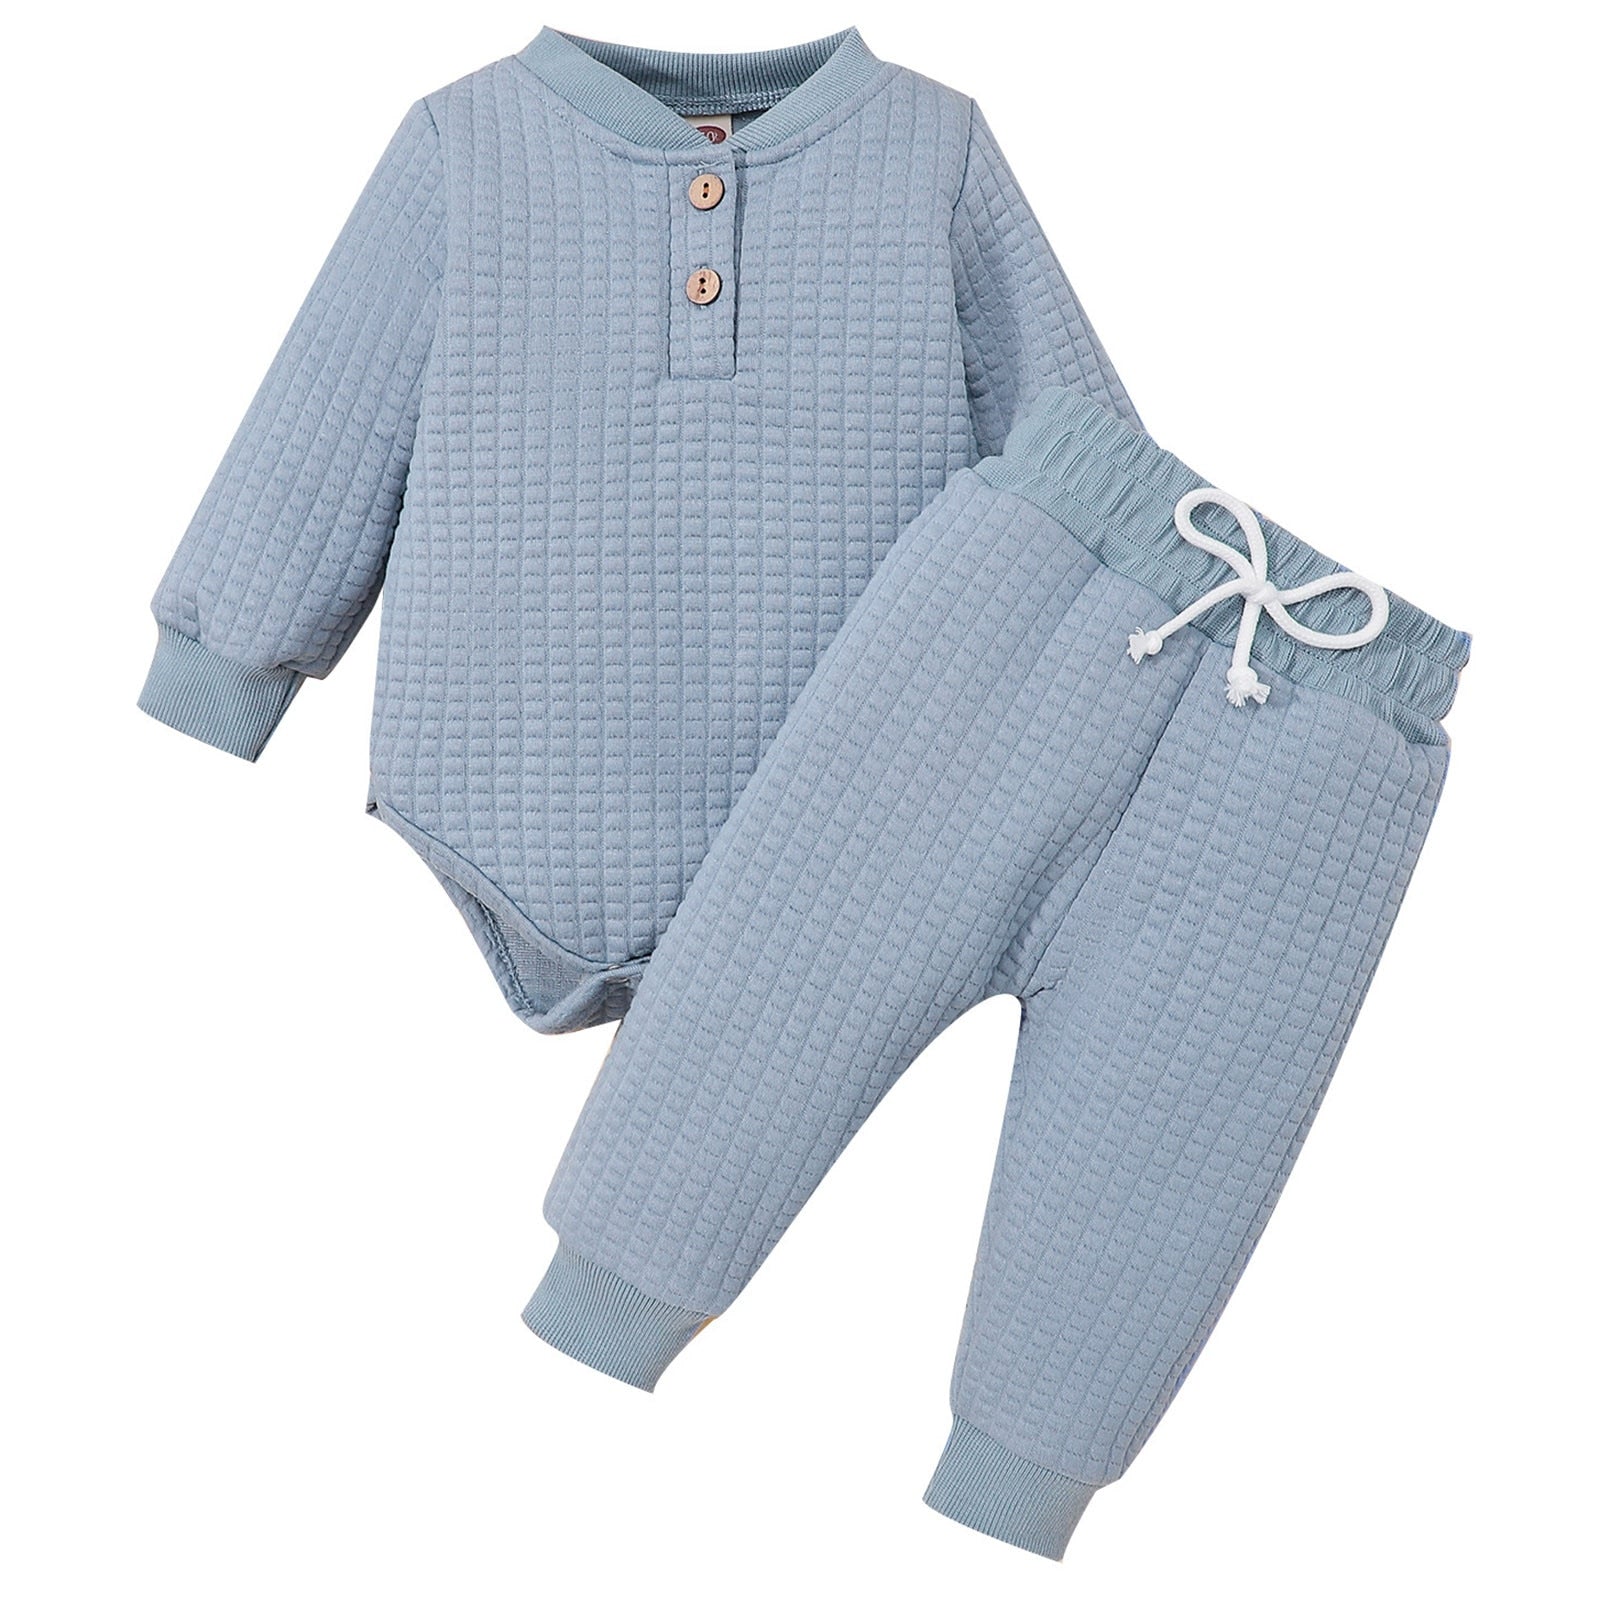 Infant Girls Boys Winter Long Sleeve Solid Thickened Warm Romper 2PCS outfit